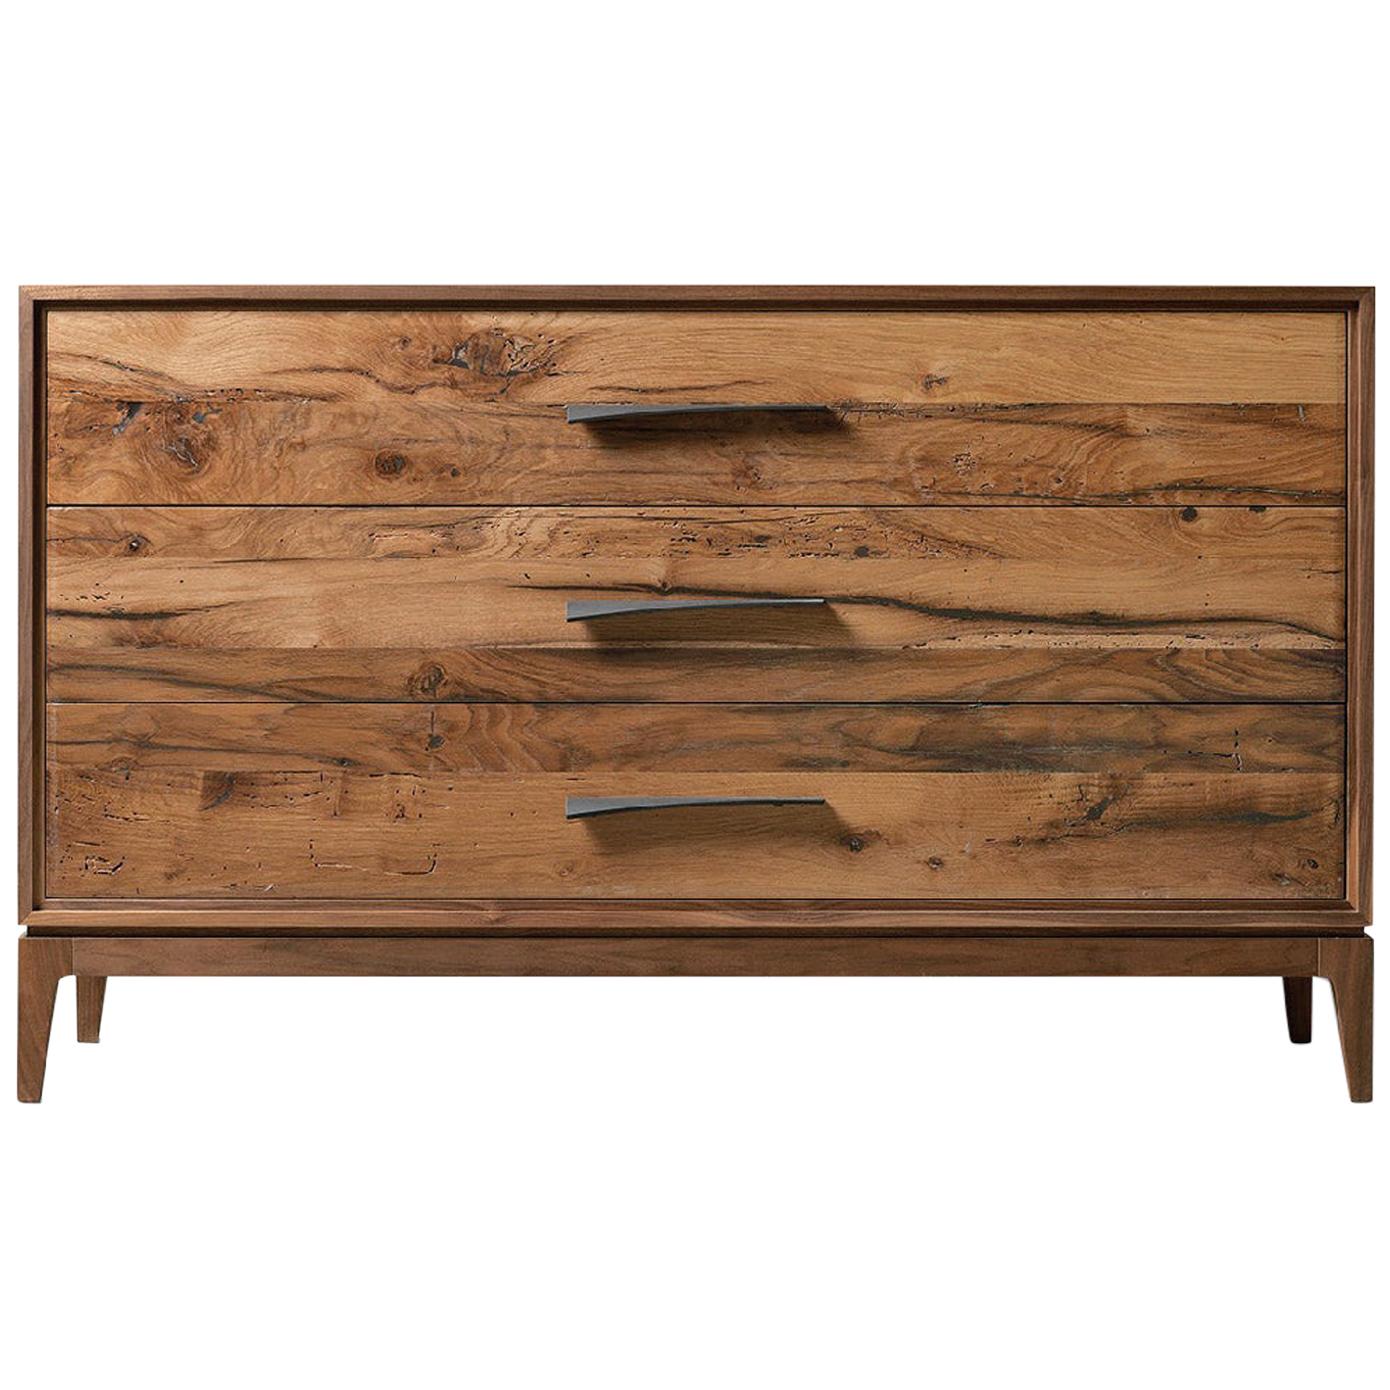 Velo Solid Wood Dresser, Walnut in Hand-Made Natural Finish, Contemporary For Sale